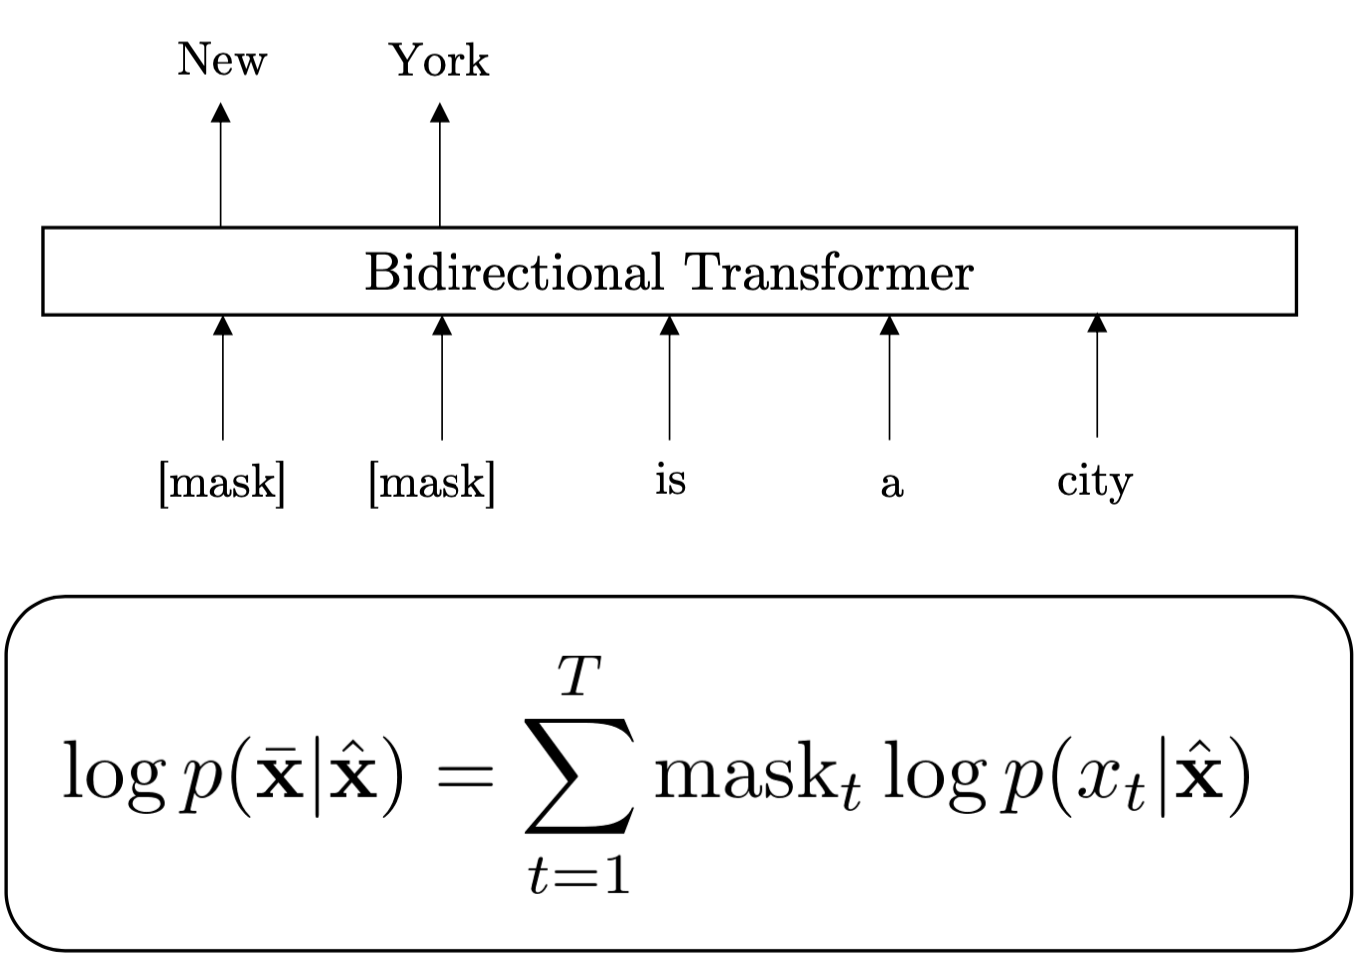 The Masked Language Modeling (MLM) objective as basis for training